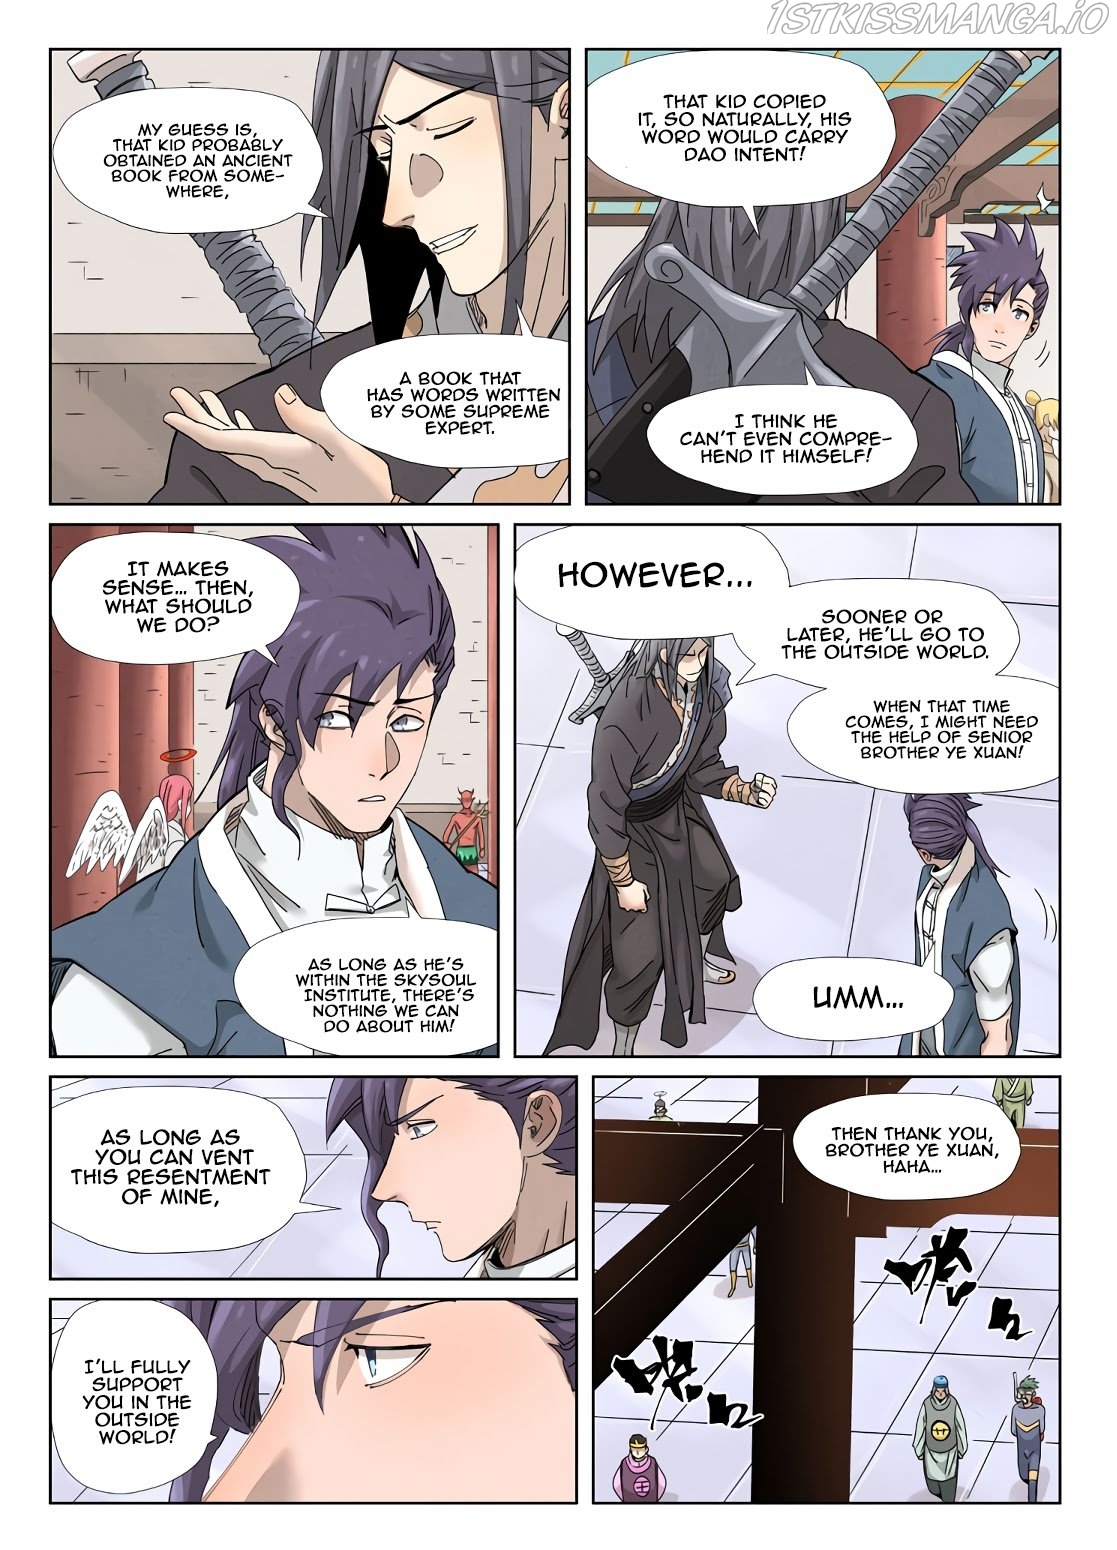 Tales of Demons and Gods Manhua Chapter 343.1 - Page 5